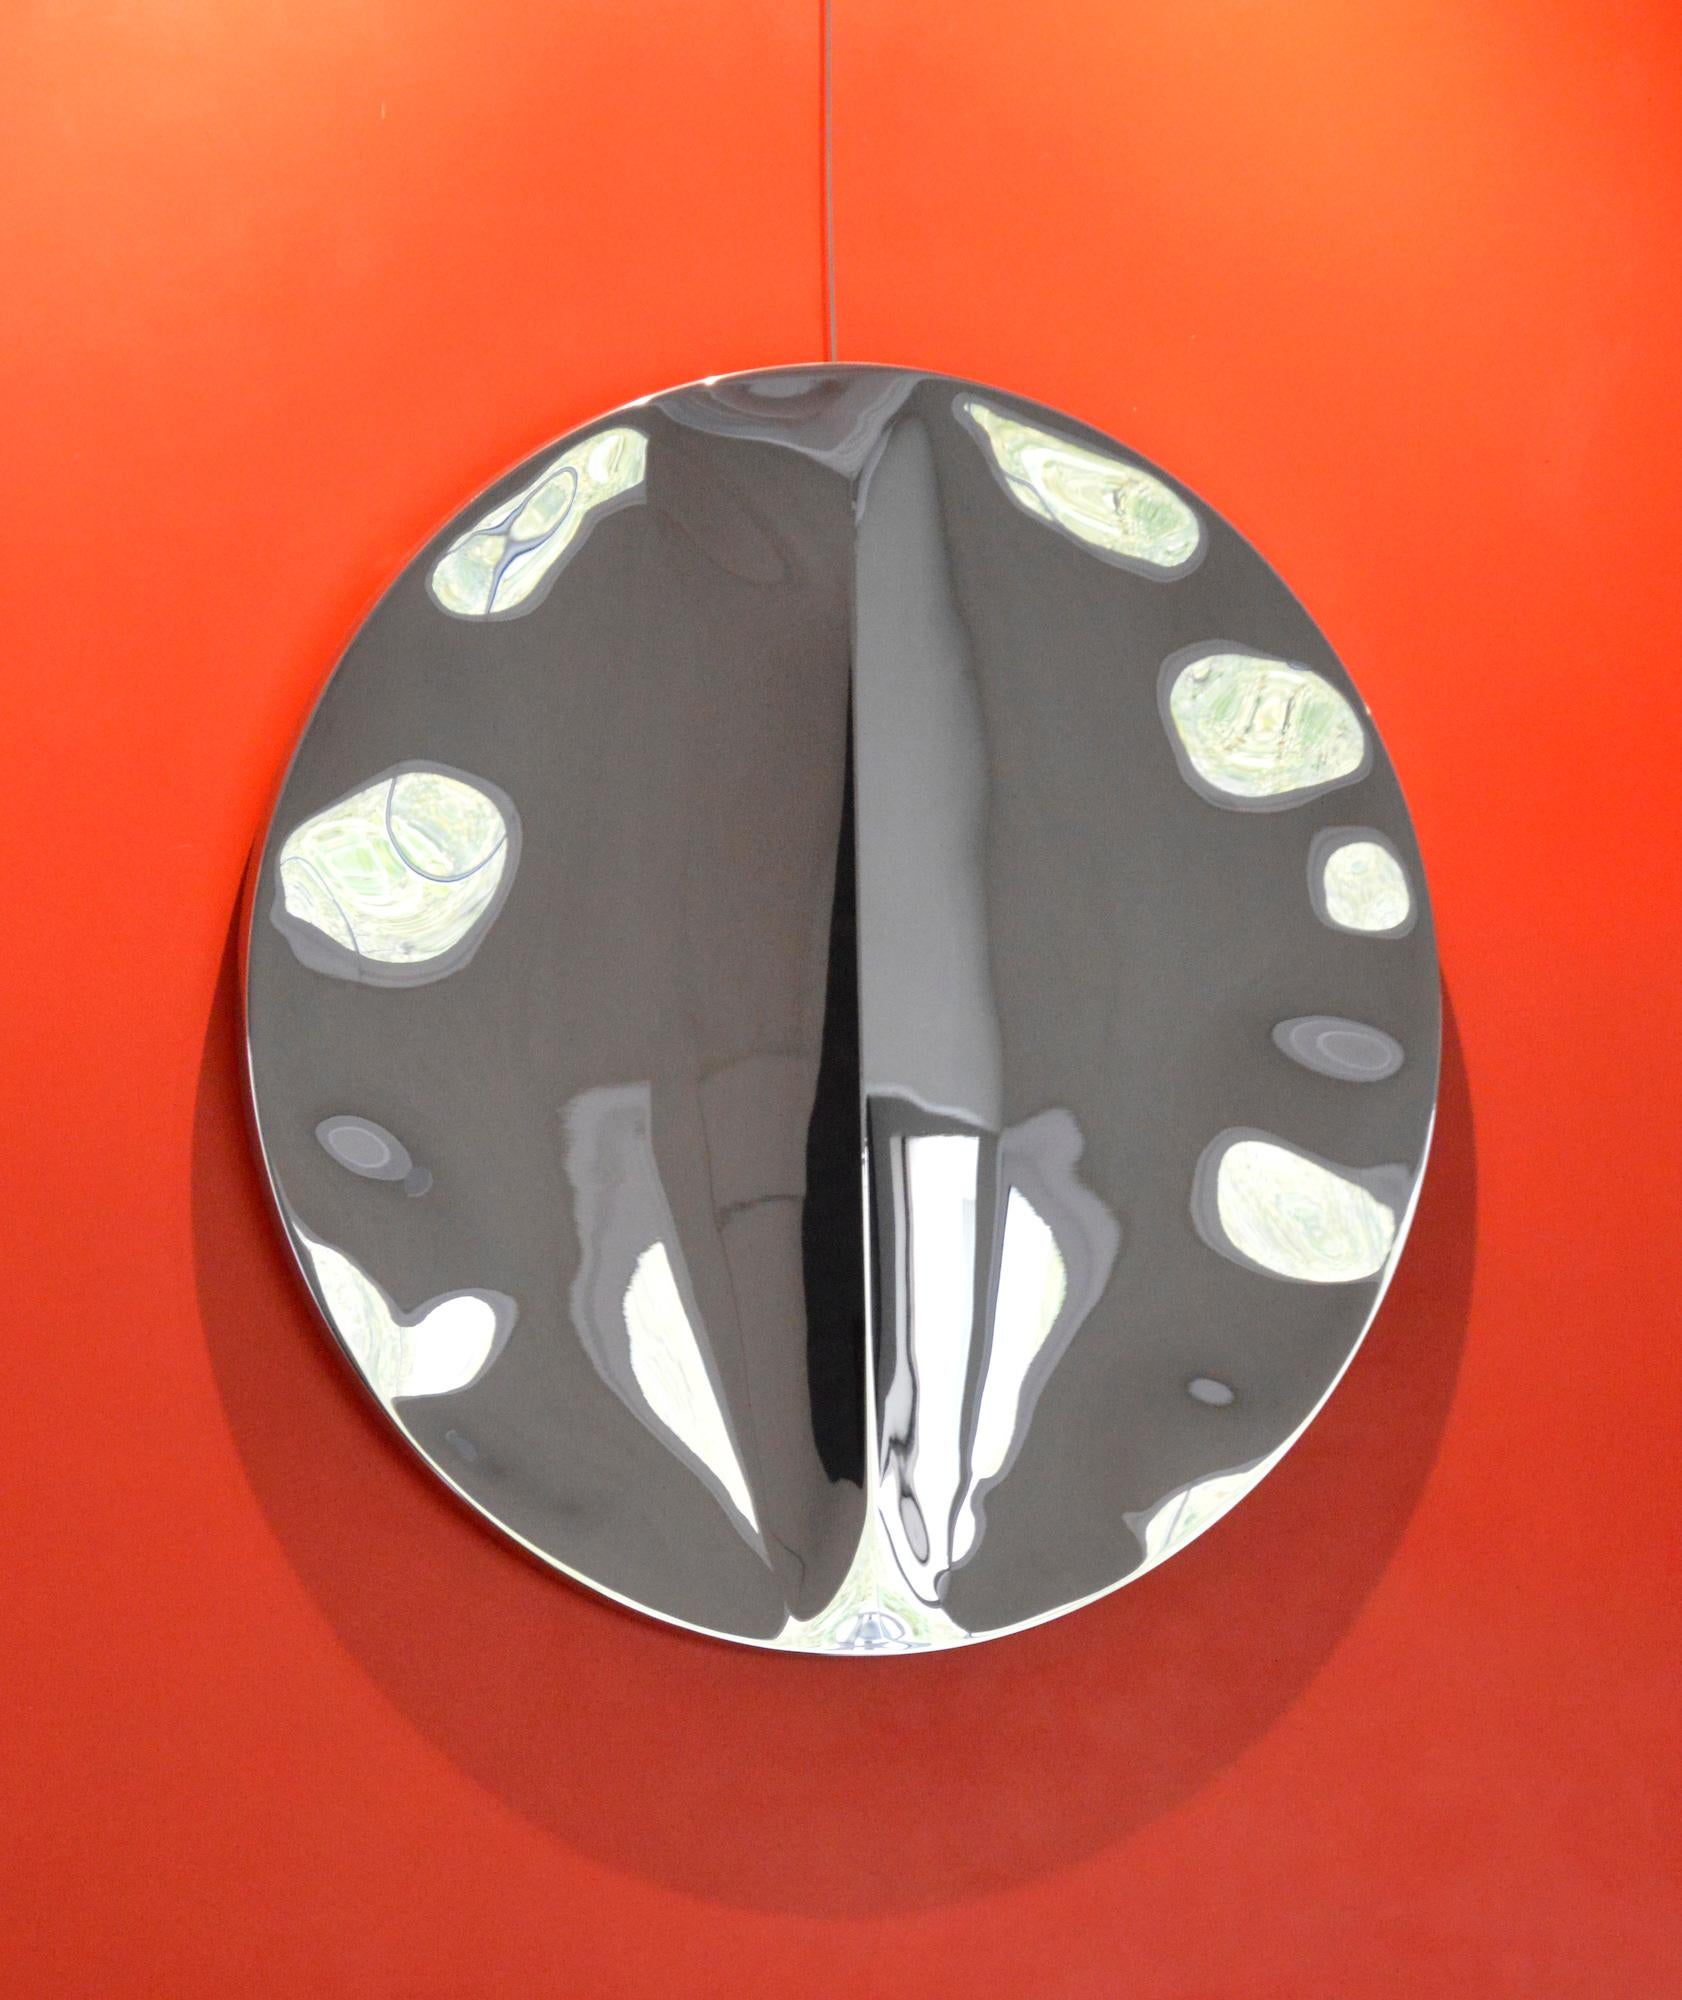 Wall mirror “with fold” I by Franck K - Stainless steel sculpture, reflection For Sale 3